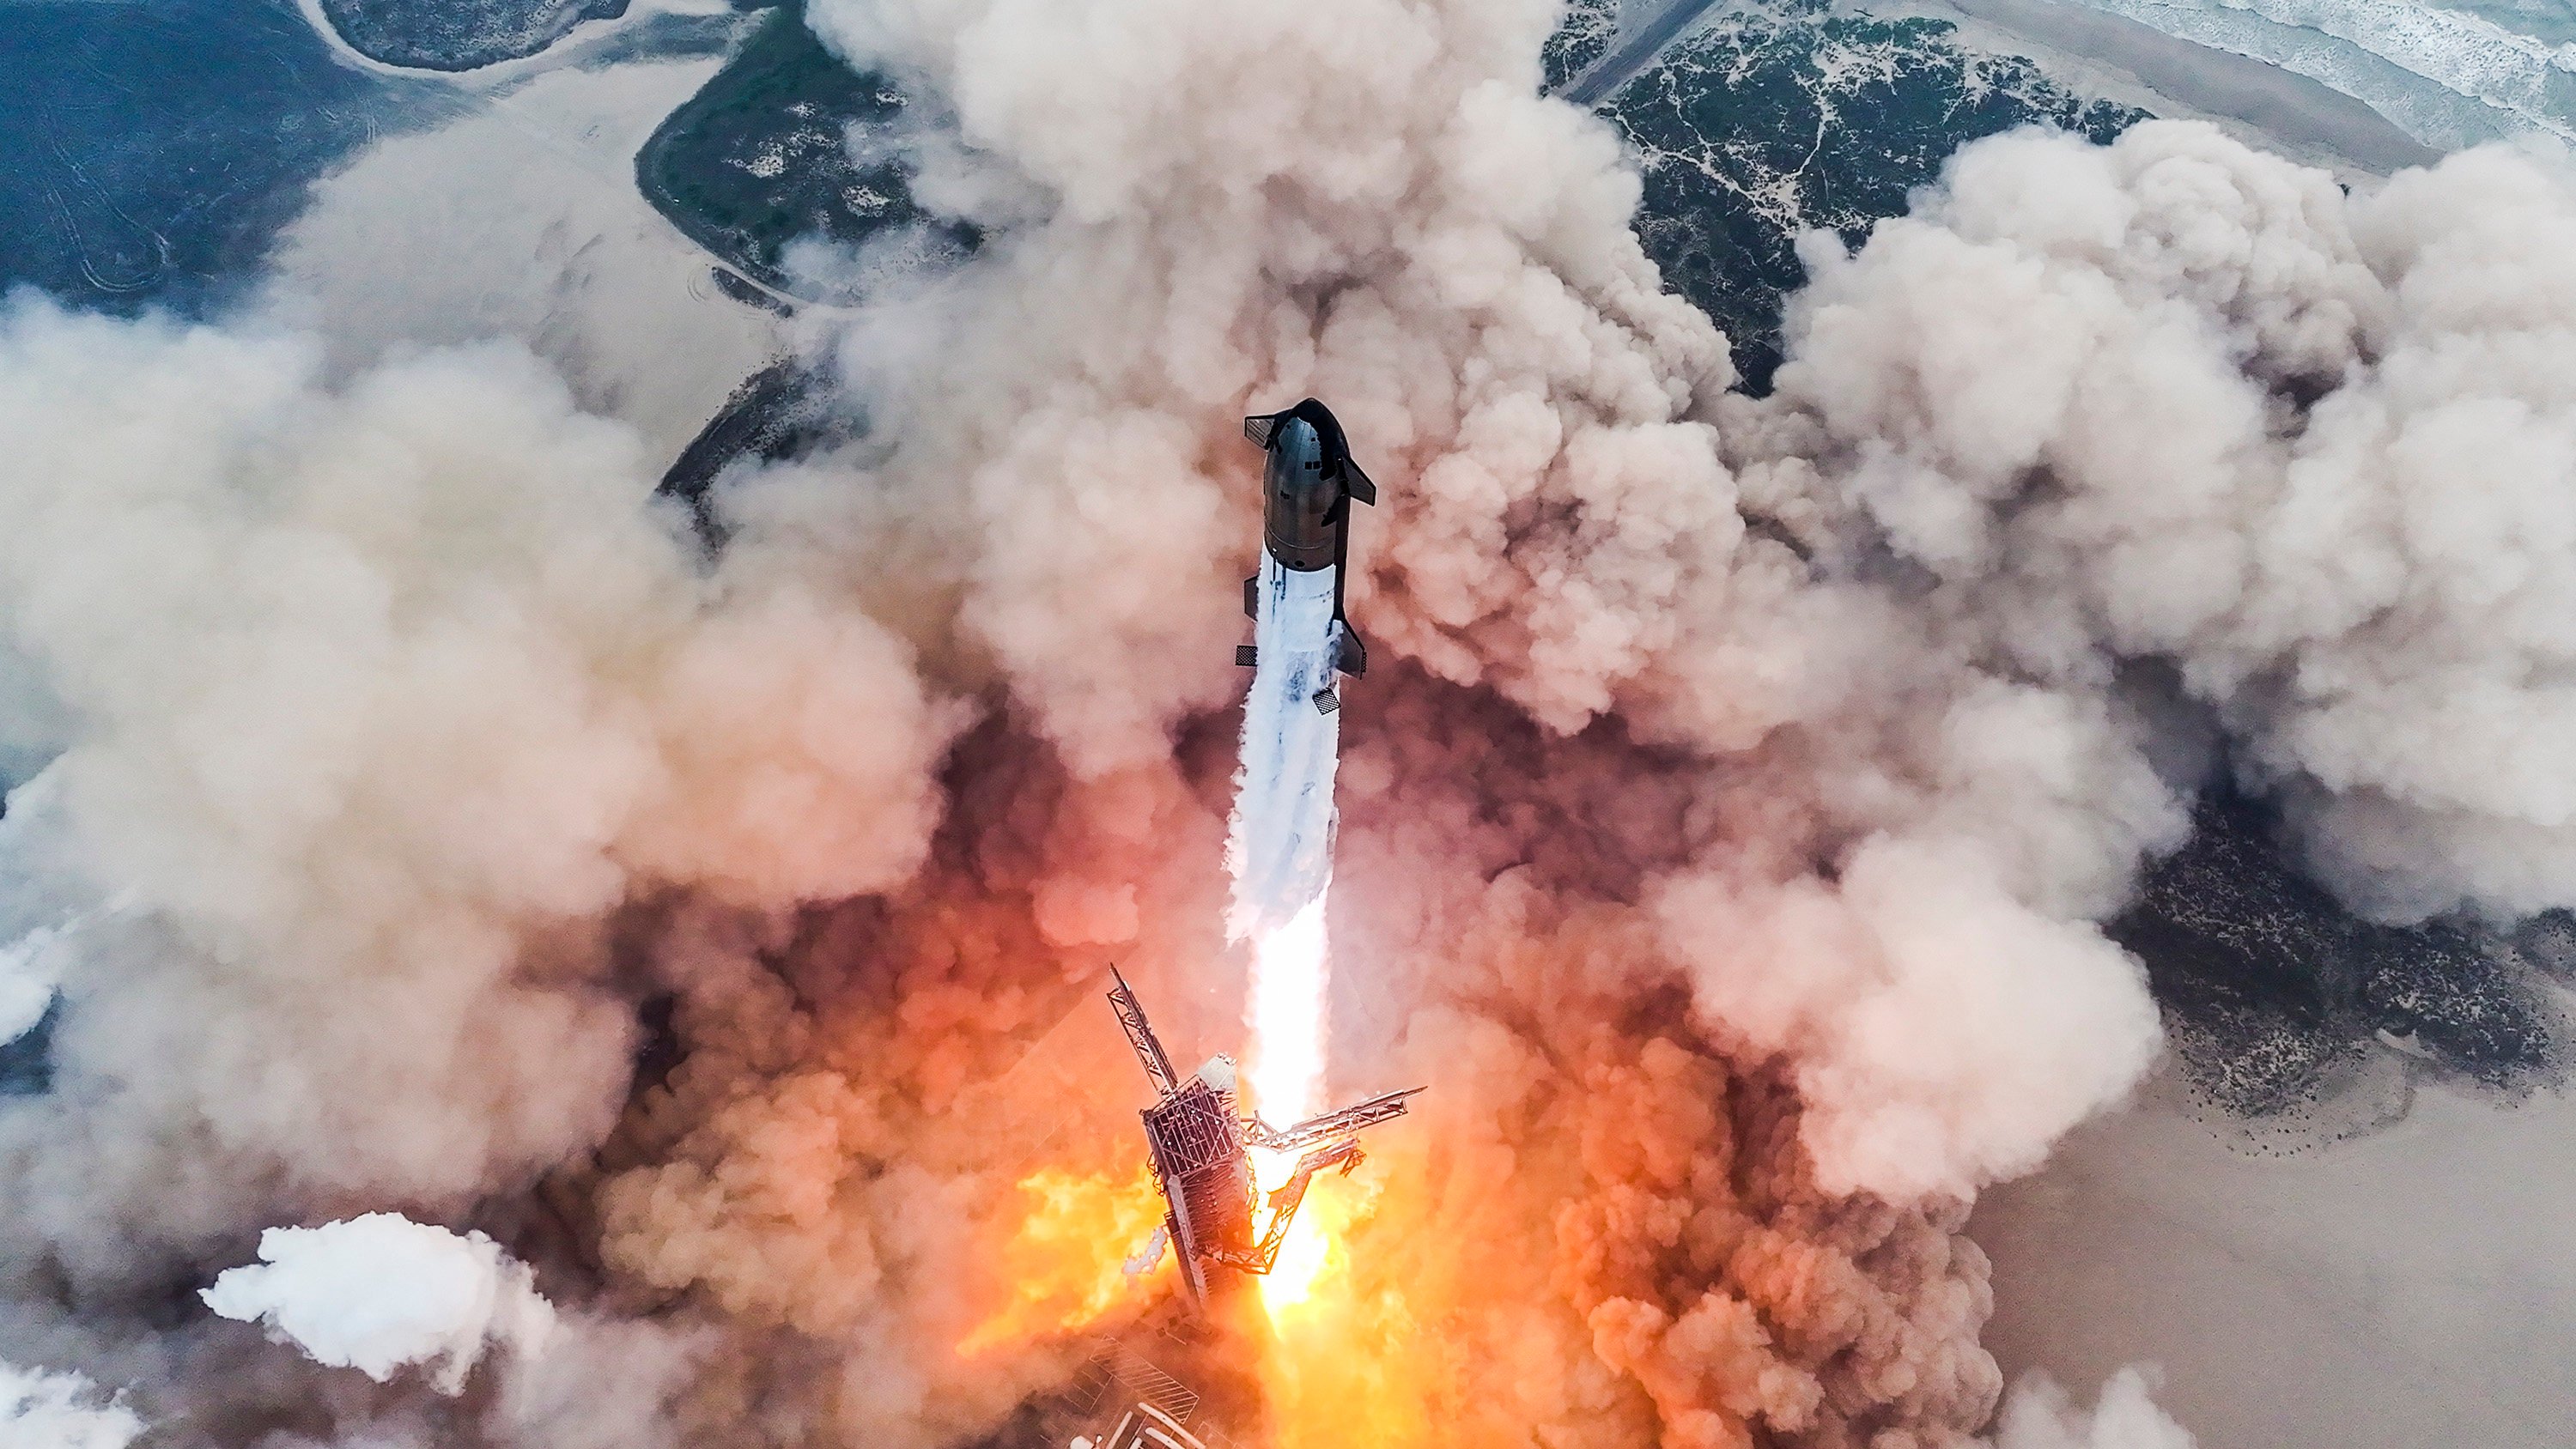 Starship, the world’s most powerful rocket, lifts off from the SpaceX test site in Boca Chica, Texas on Thursday. Photo: SpaceX